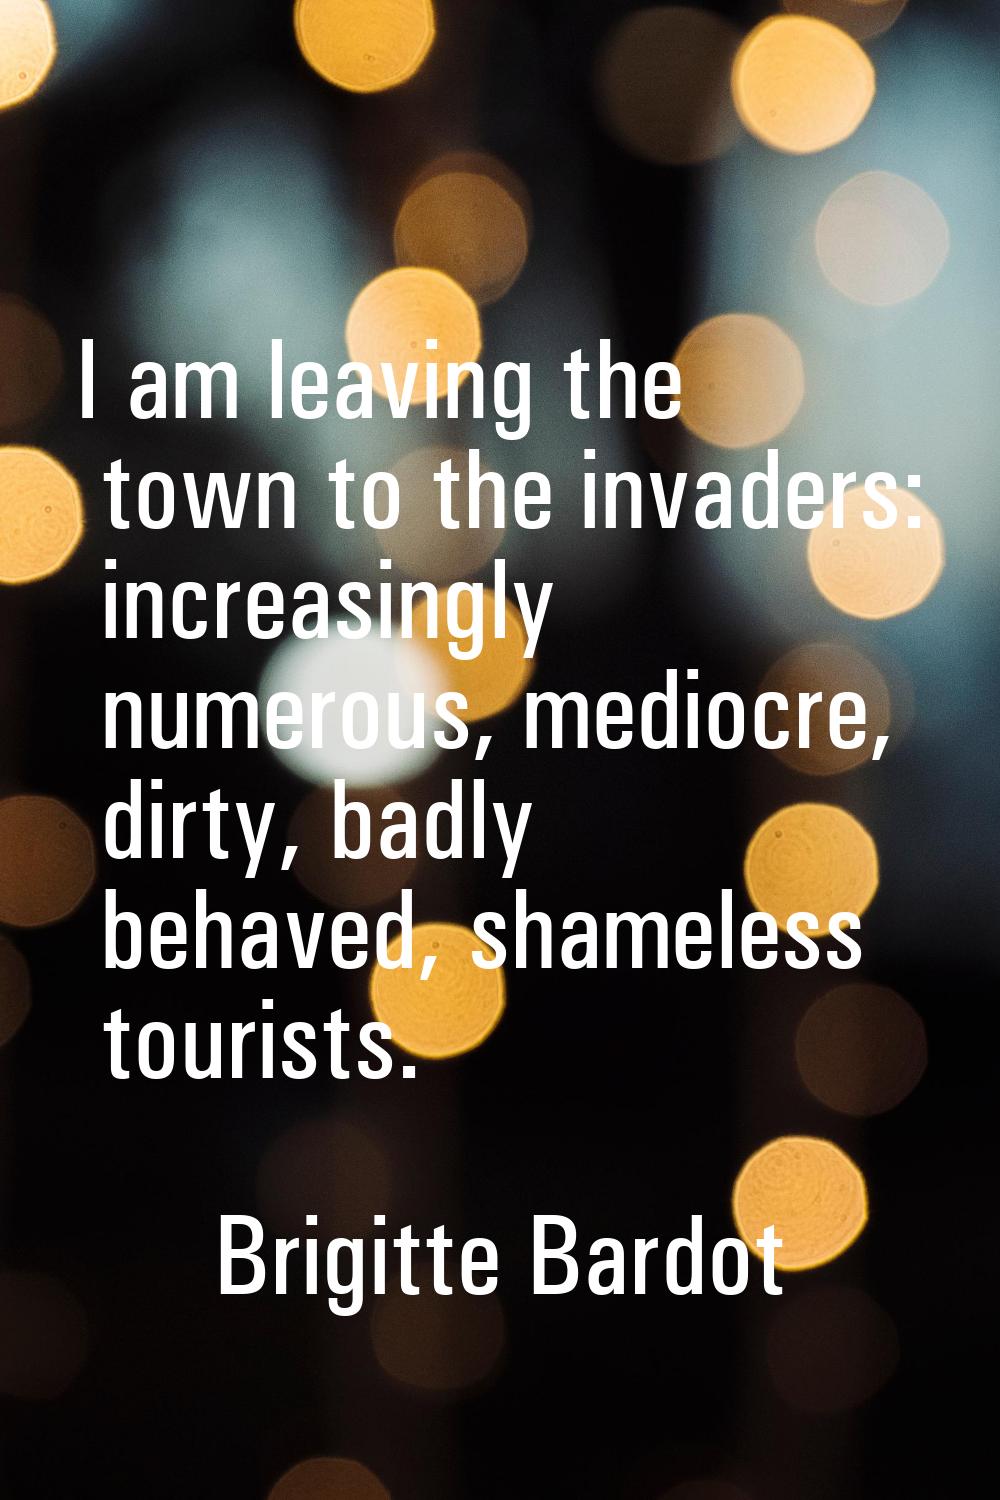 I am leaving the town to the invaders: increasingly numerous, mediocre, dirty, badly behaved, shame